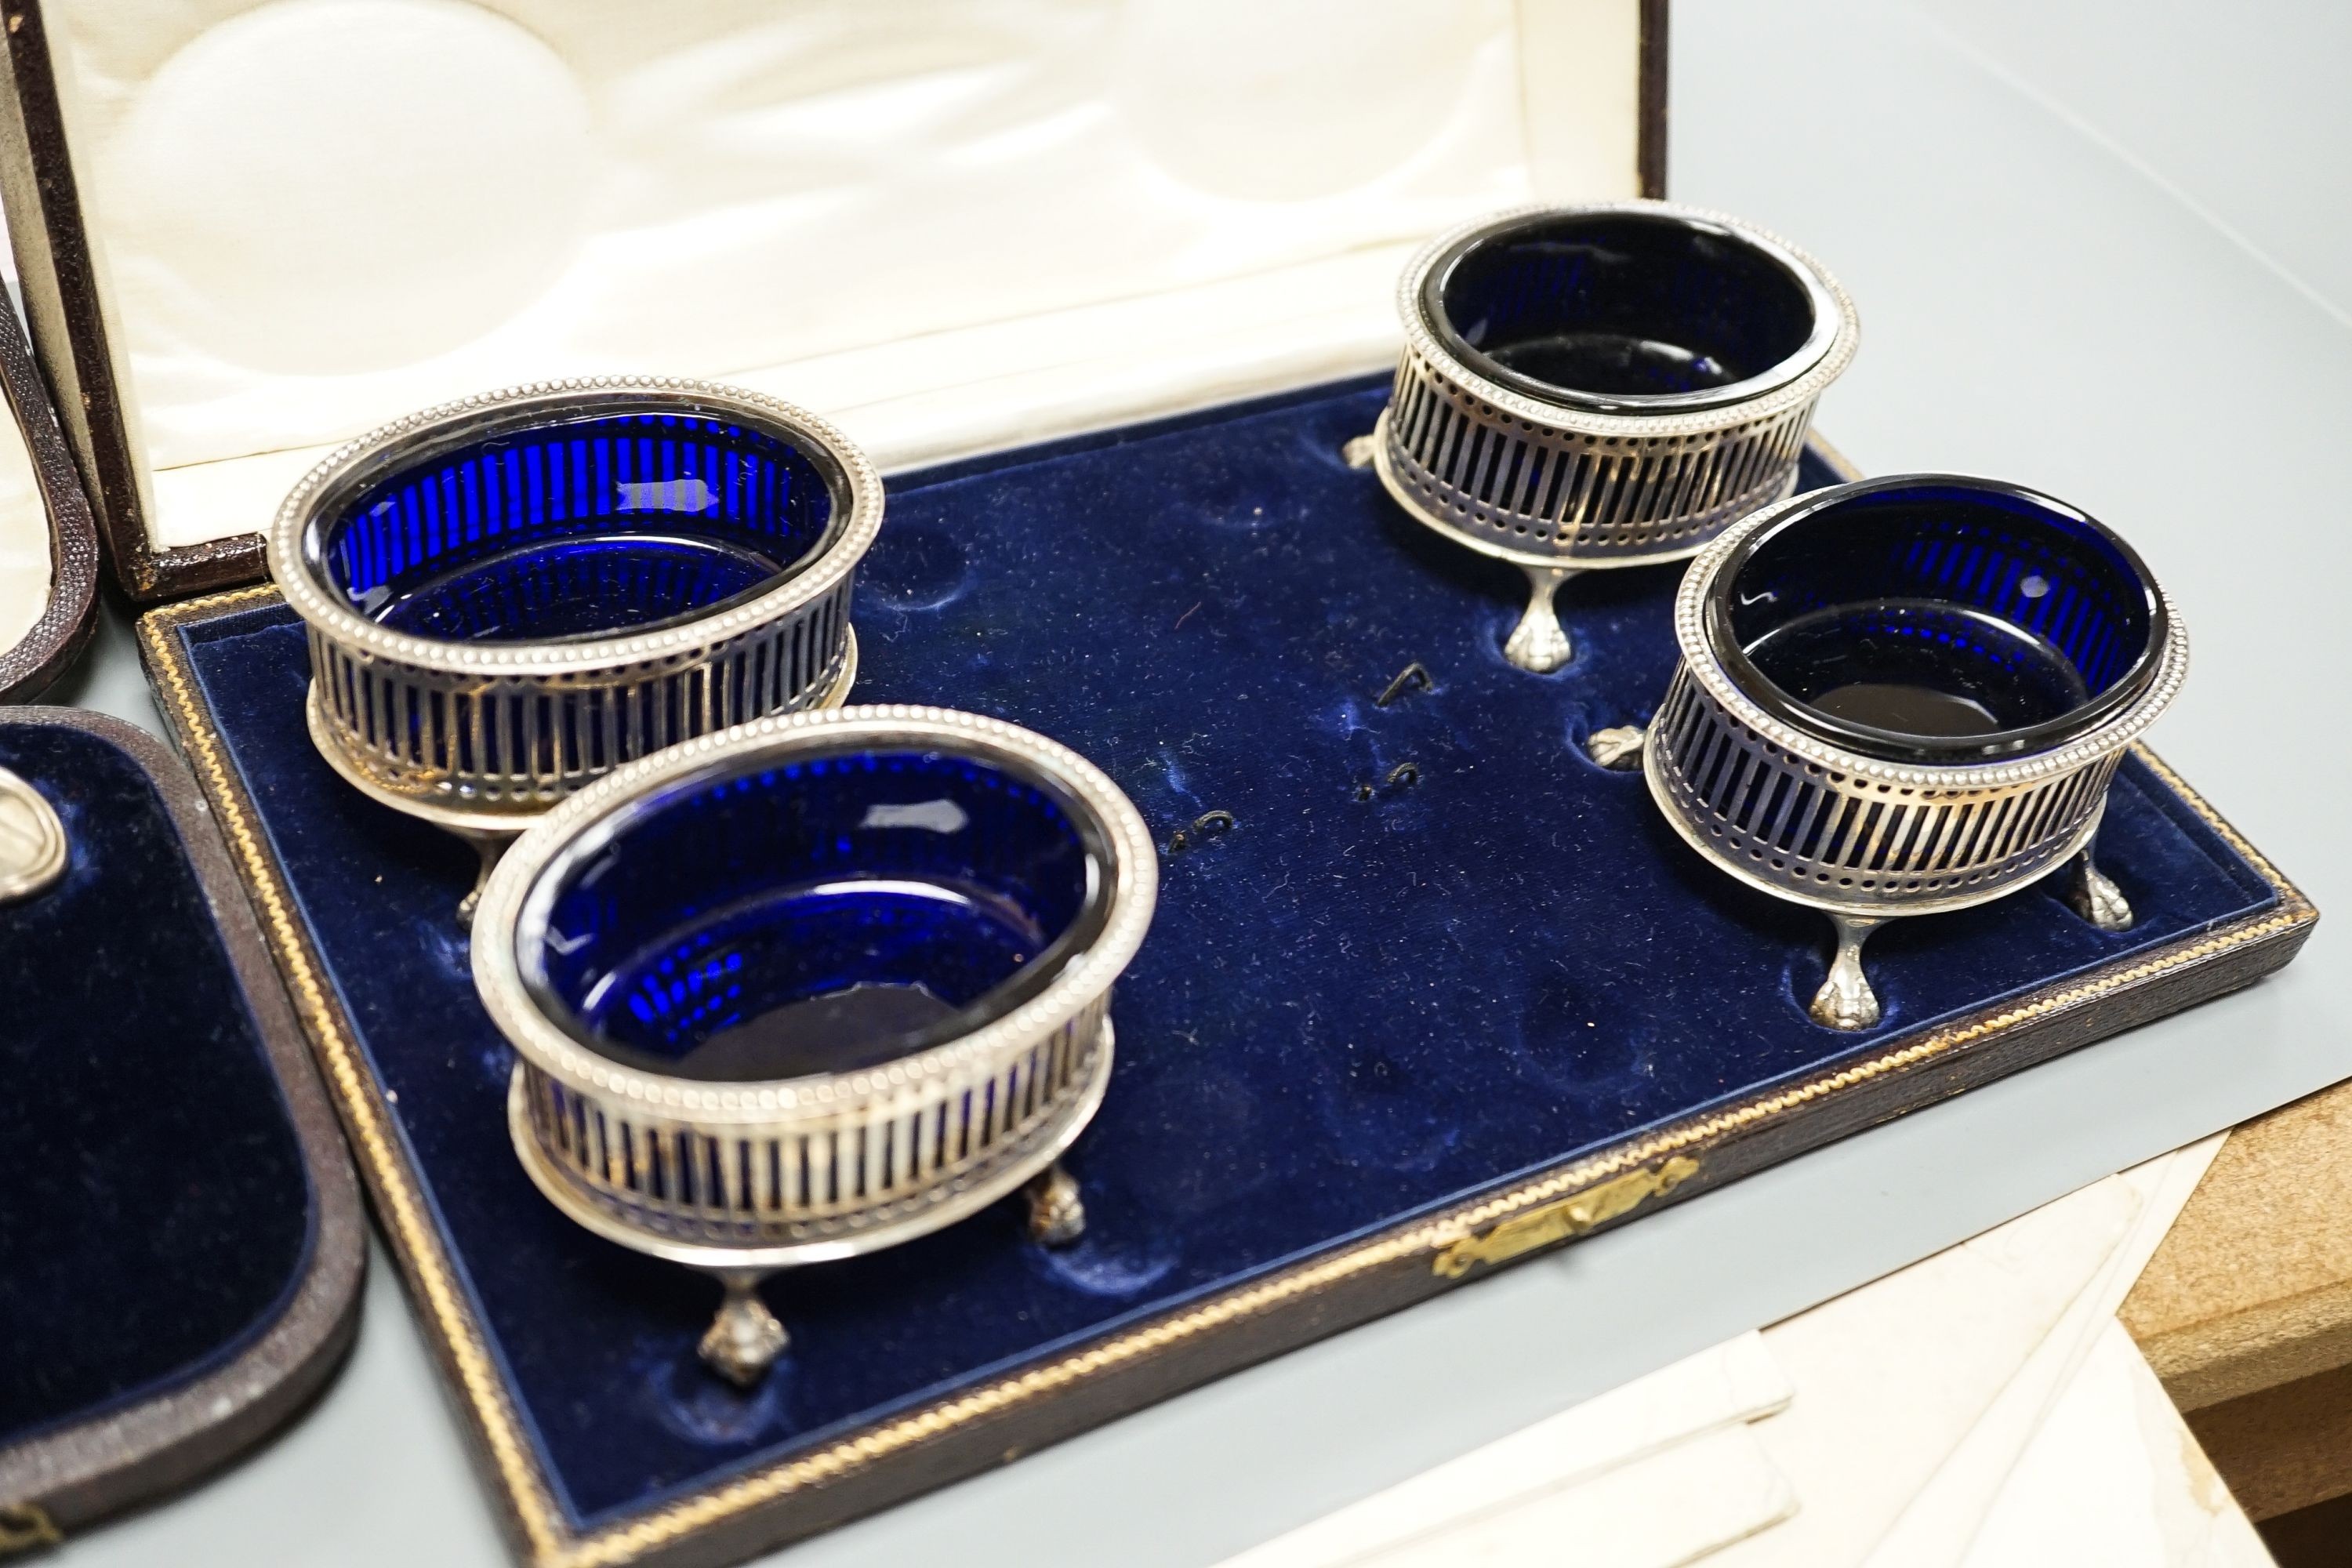 A cased pair of Victorian silver fish servers, London, 1856, together with a cased set of four George V pierced silver oval salts with cobalt blue glass liners (no spoons).